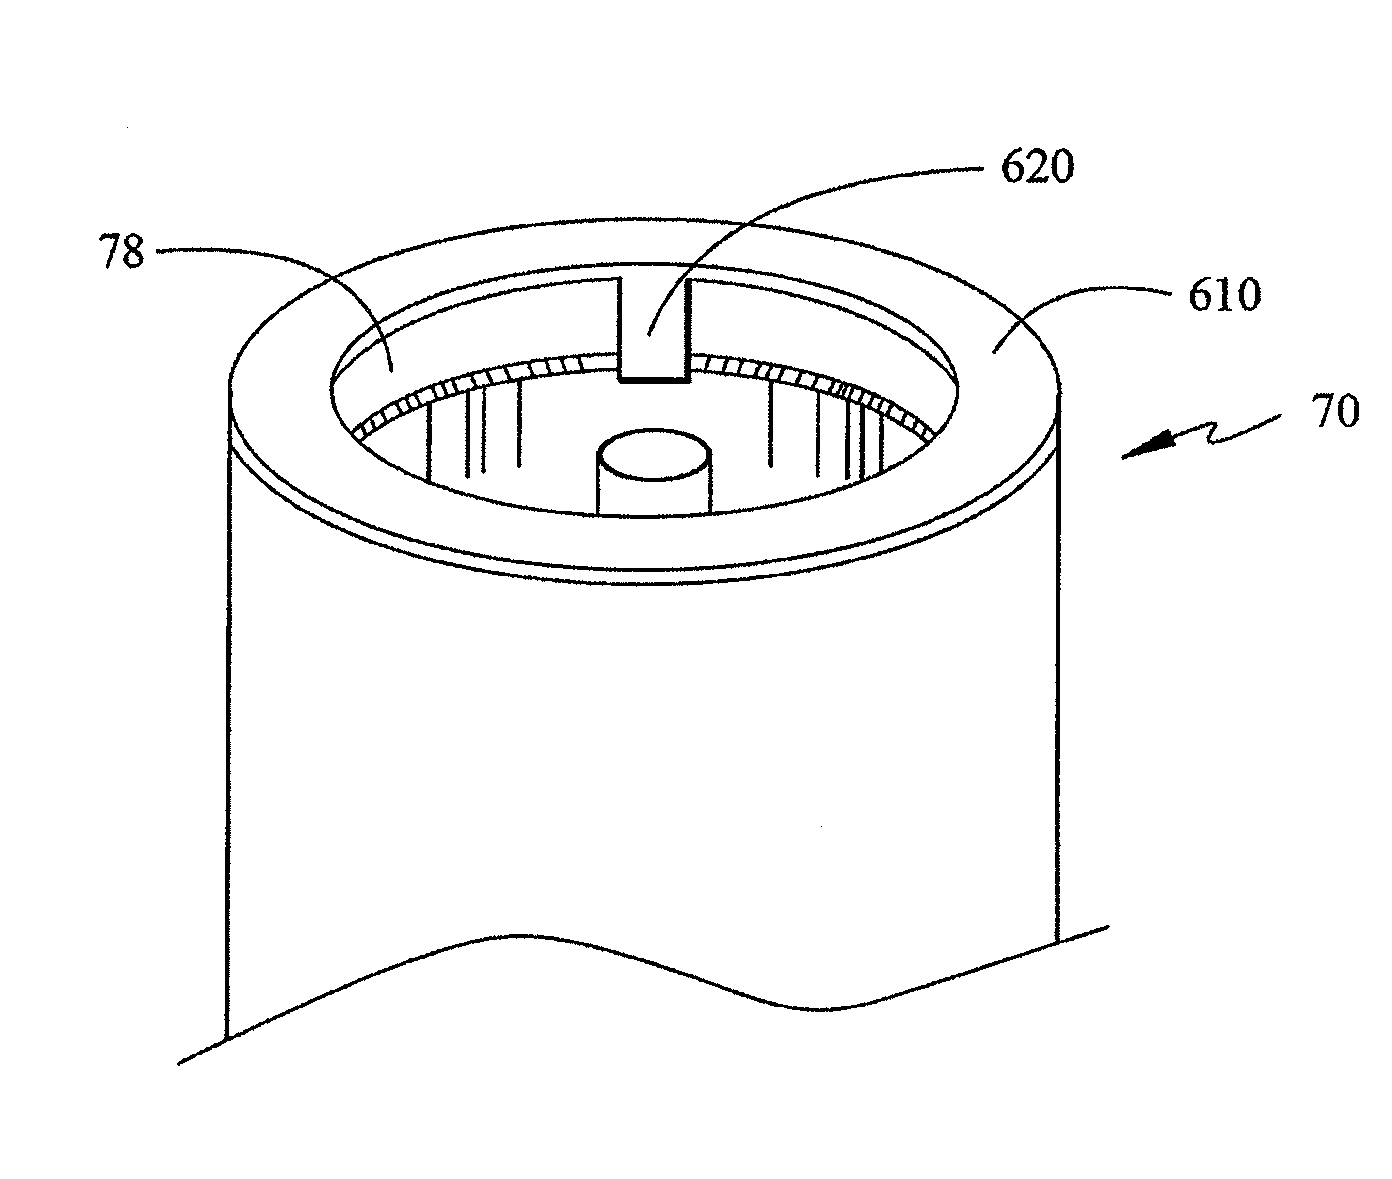 Buttress assembly for use with surgical stapling device